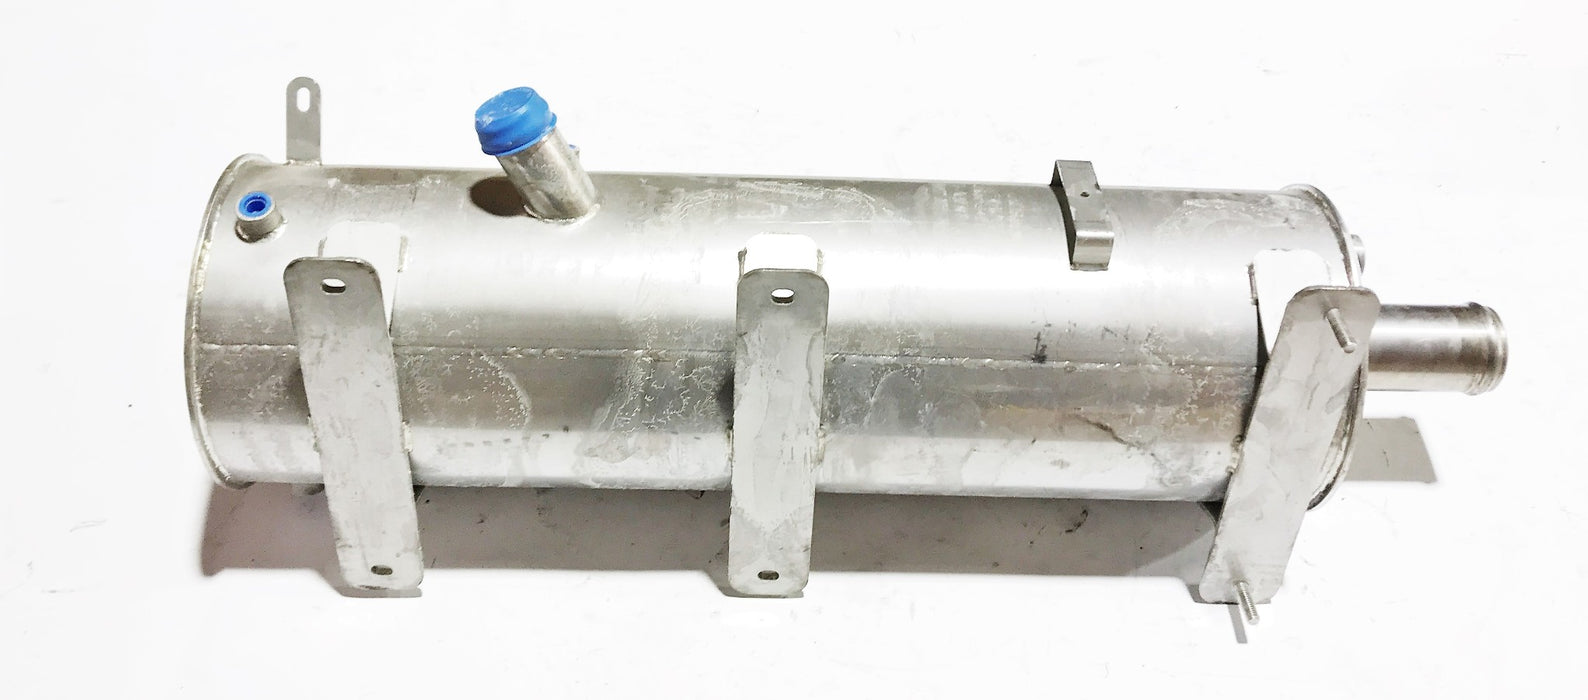 New Flyer Welded Coolant Surge Tank Assembly 605843 NOS